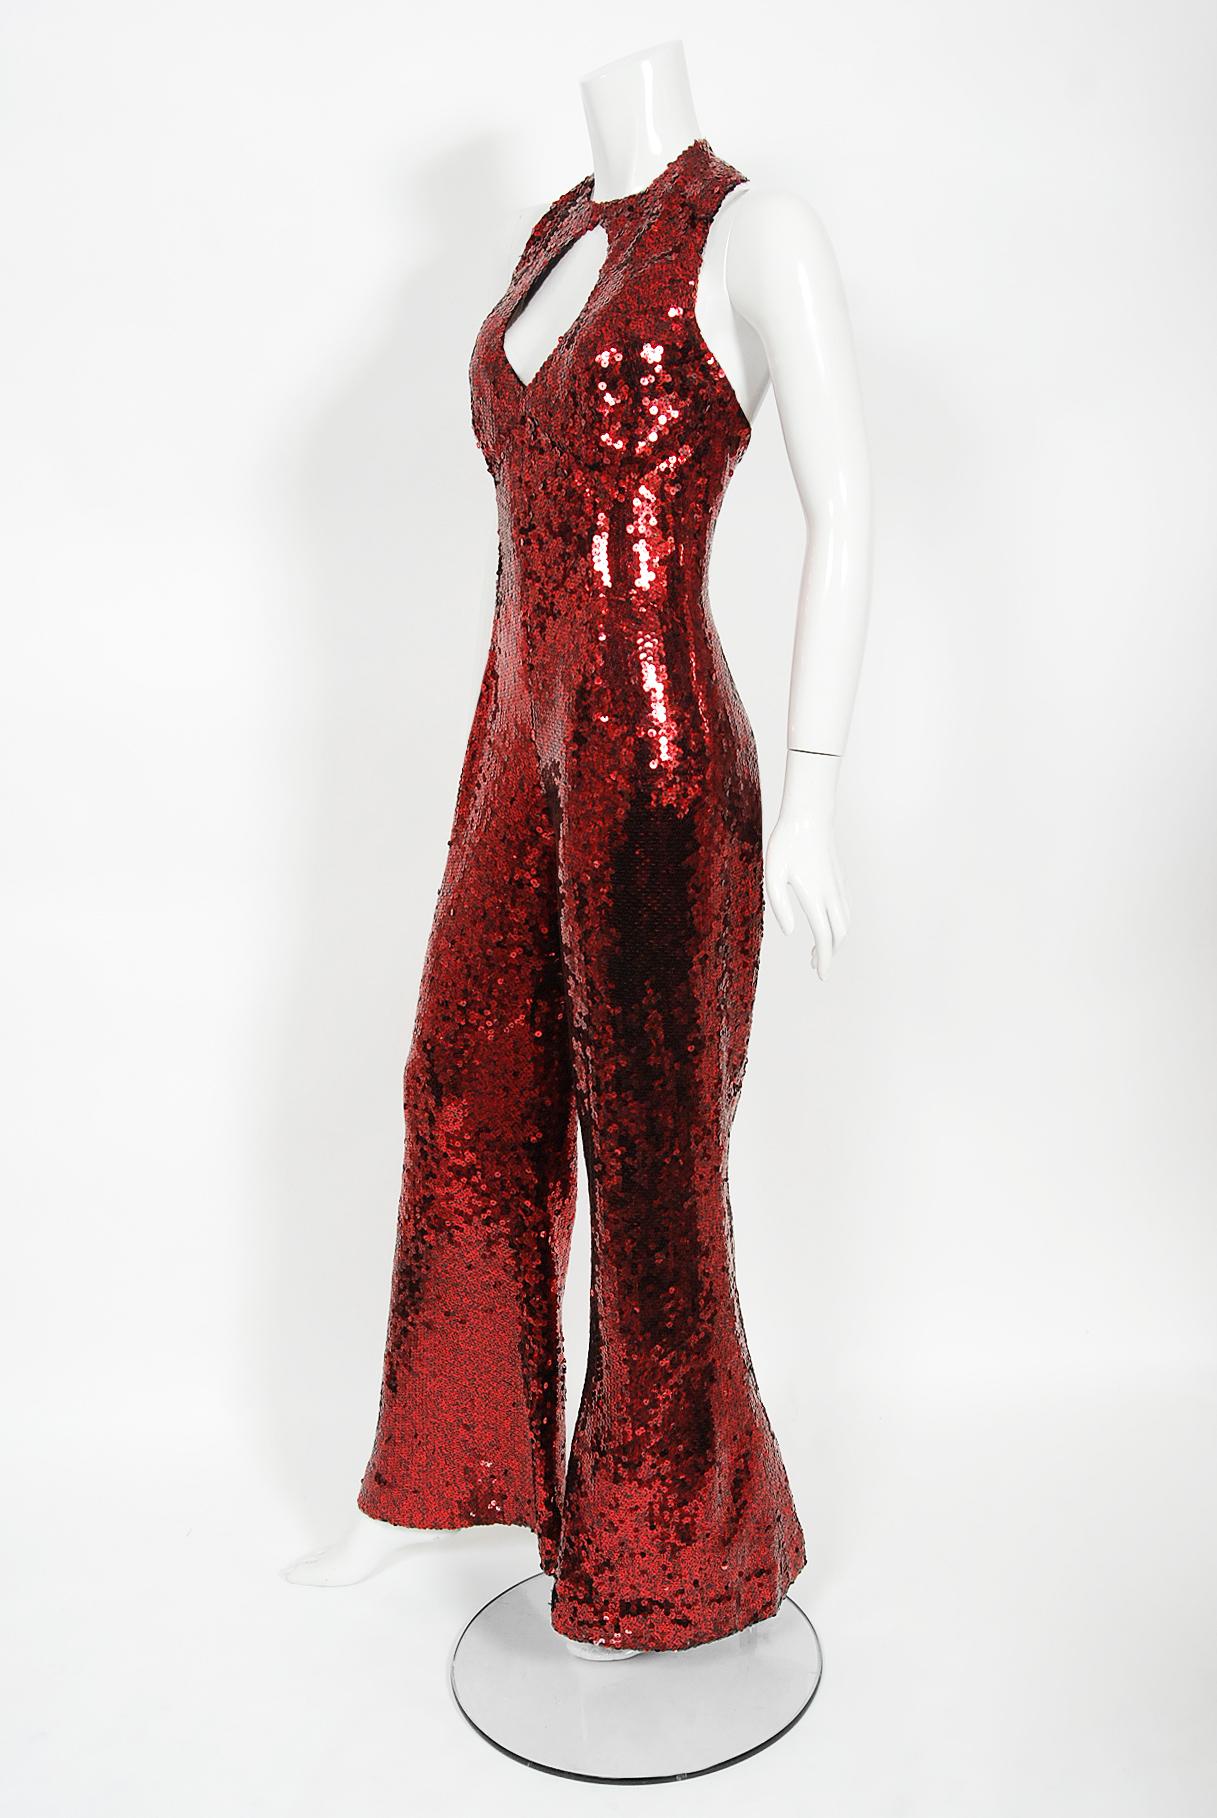 Women's Vintage 1970s Liza Minnell Owned Red Sequin Stretch Knit Key-Hole Disco Jumpsuit